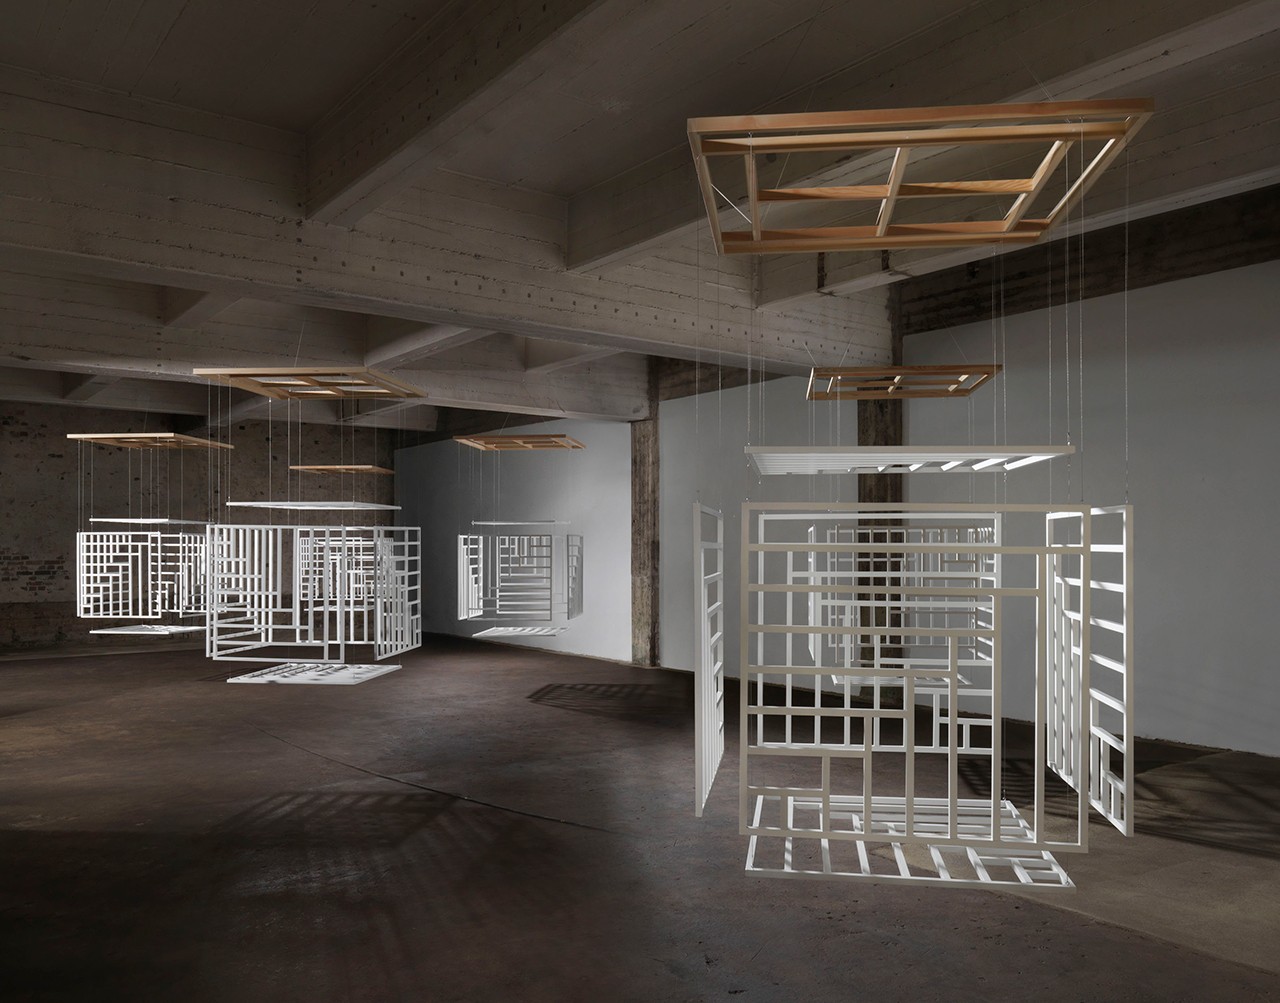 Title of Installation: Webbing Material: 6 cubes (beech wood), paint, wire, suspended on frames (fir) from the ceiling Dimensions: 140 x 140 cm; Hight in relation to space Exhibition: In situ: A Sequence of Works Berlin Tegel June 1 – 30, 2016